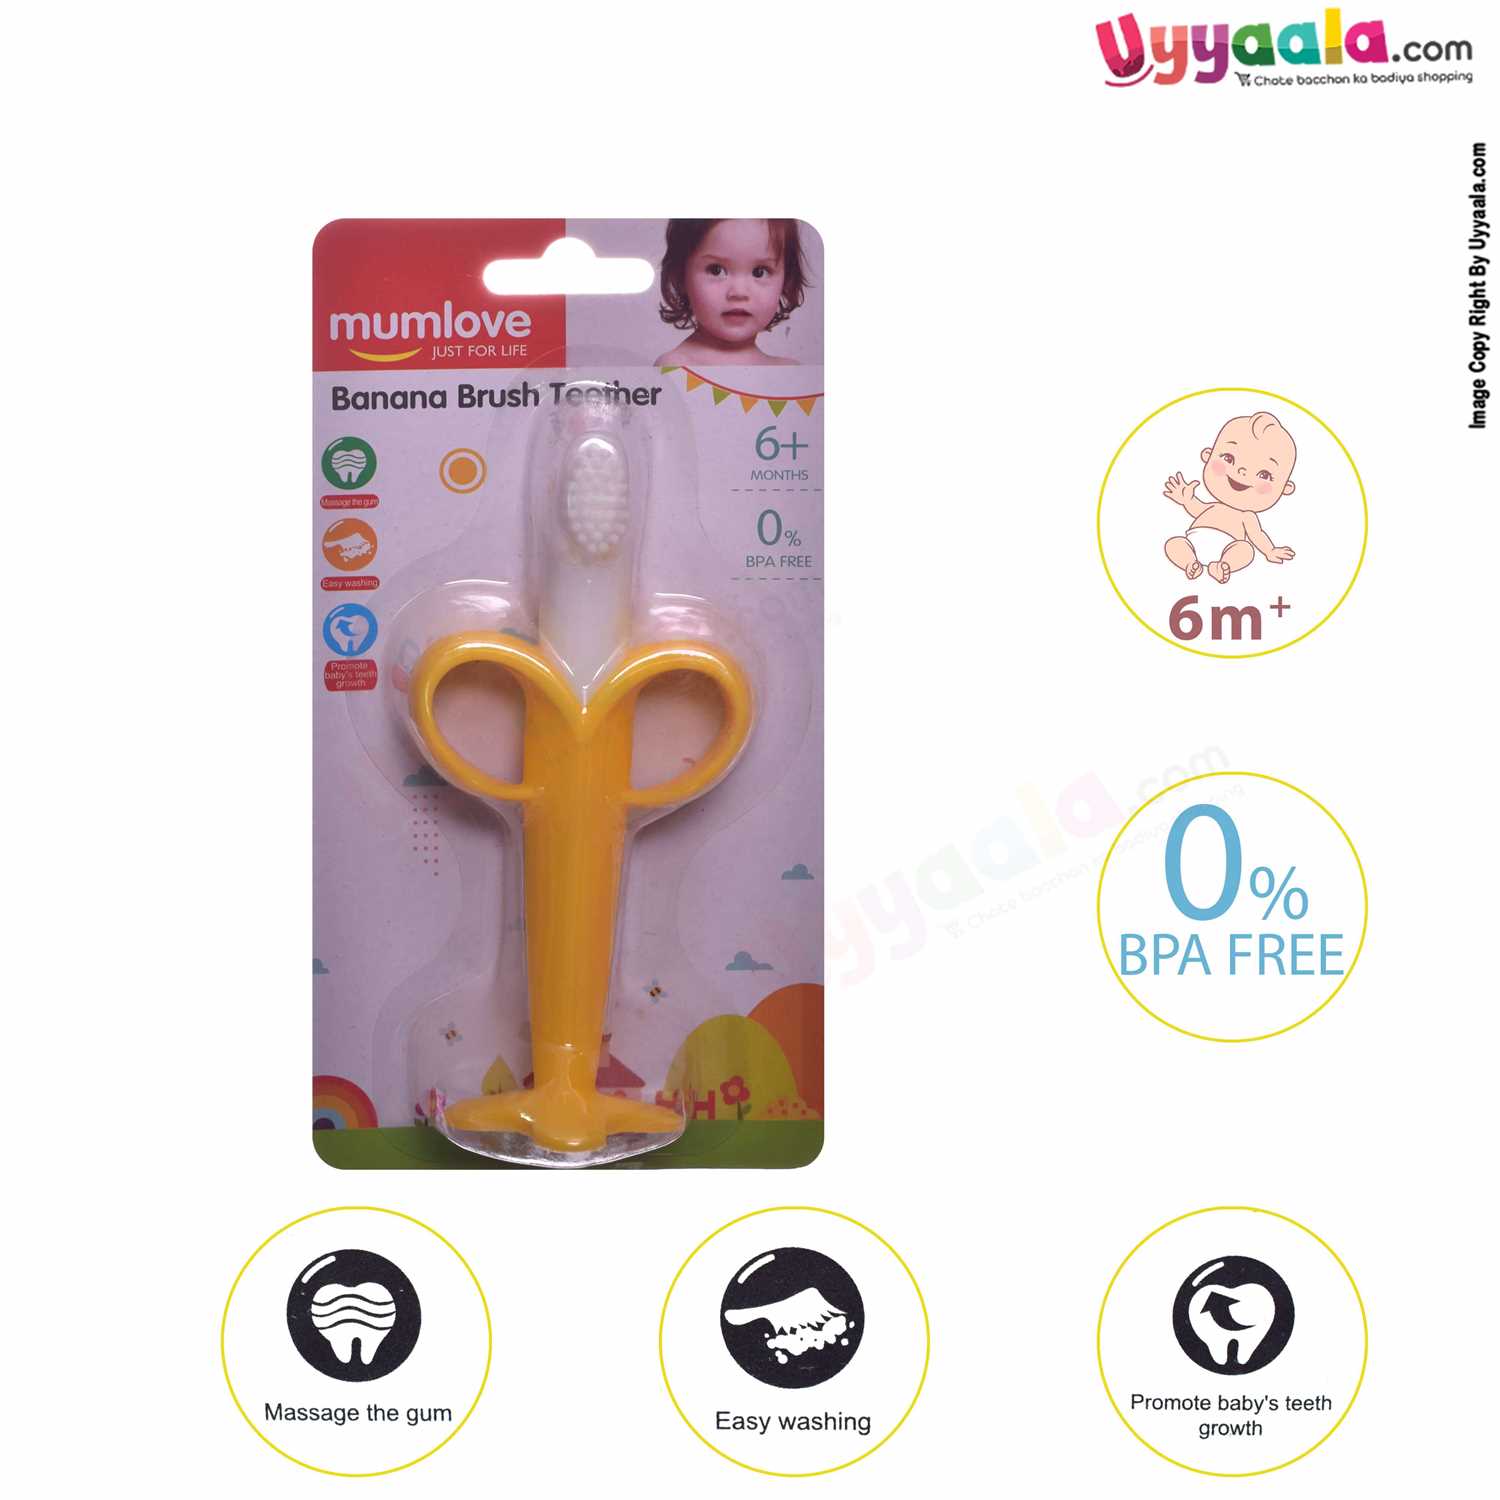 MUMLOVE Soft Silicone Banana shaped Baby Oral Massager cum Toothbrush, 6m+ age - Yellow